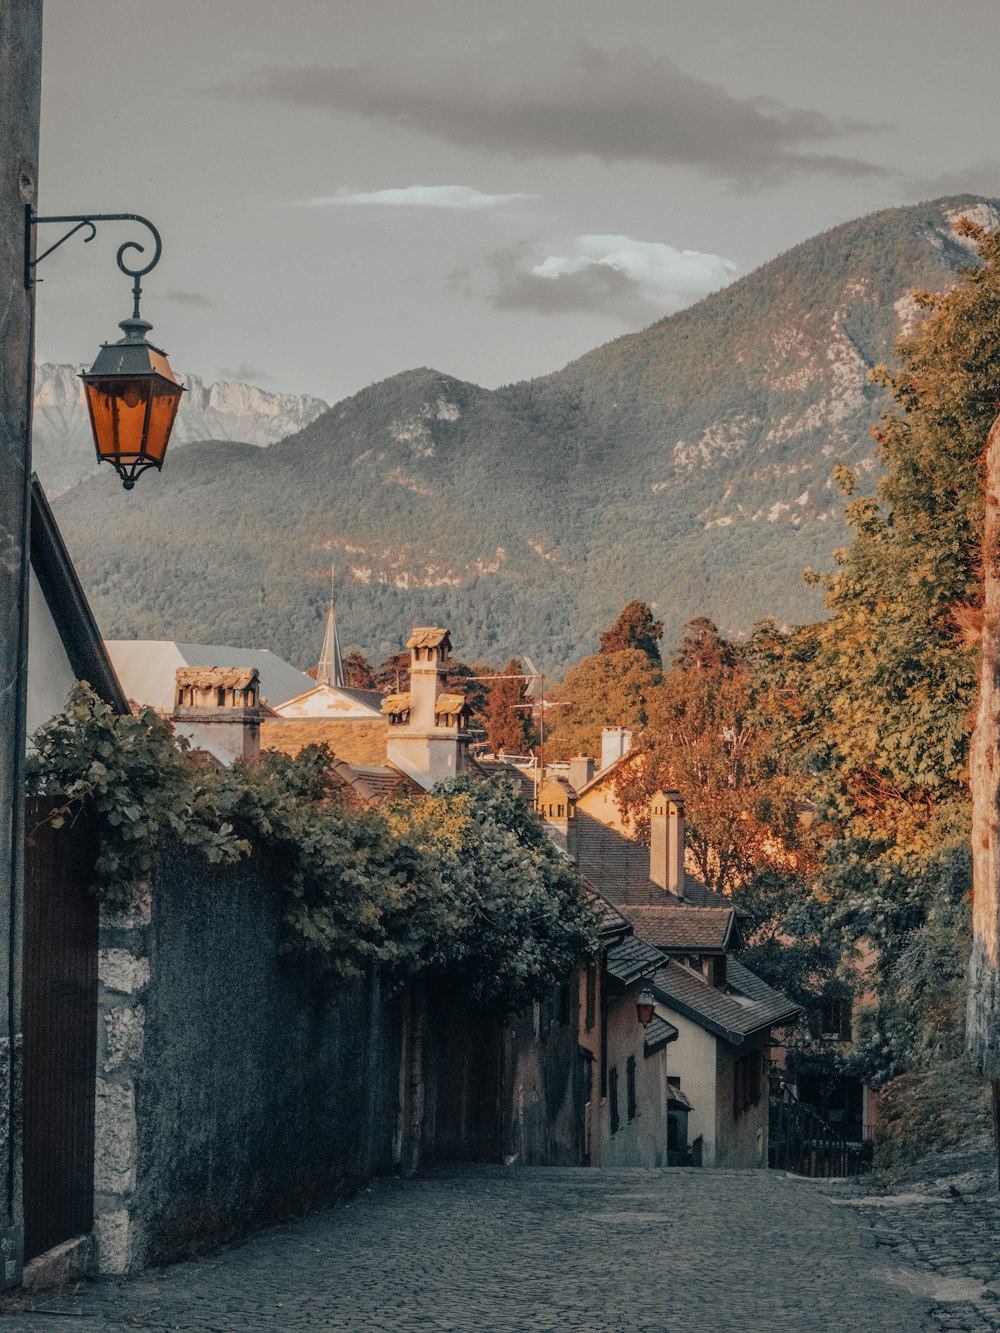 a cobblestone street with a lamp post and mountains in the background